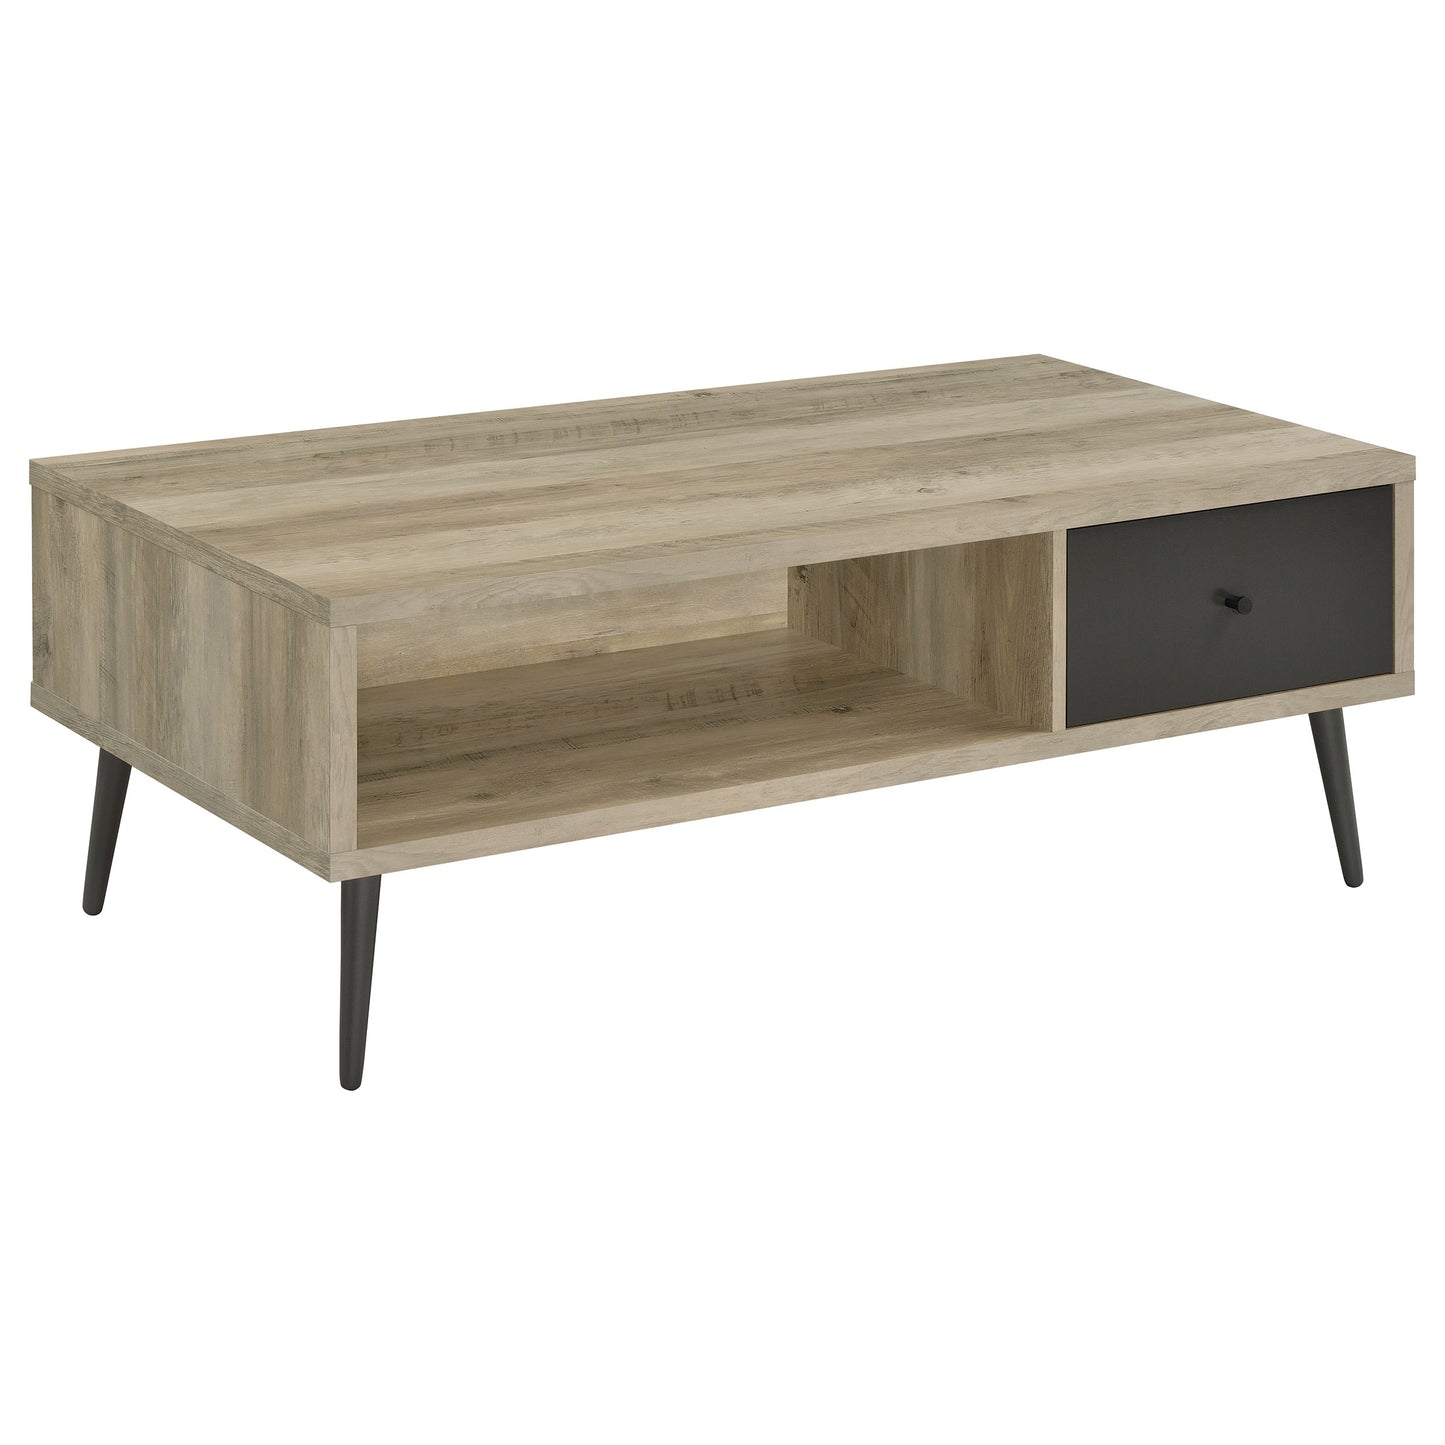 Welsh 1-drawer Rectangular Engineered Wood Coffee Table With Storage Shelf Antique Pine and Grey